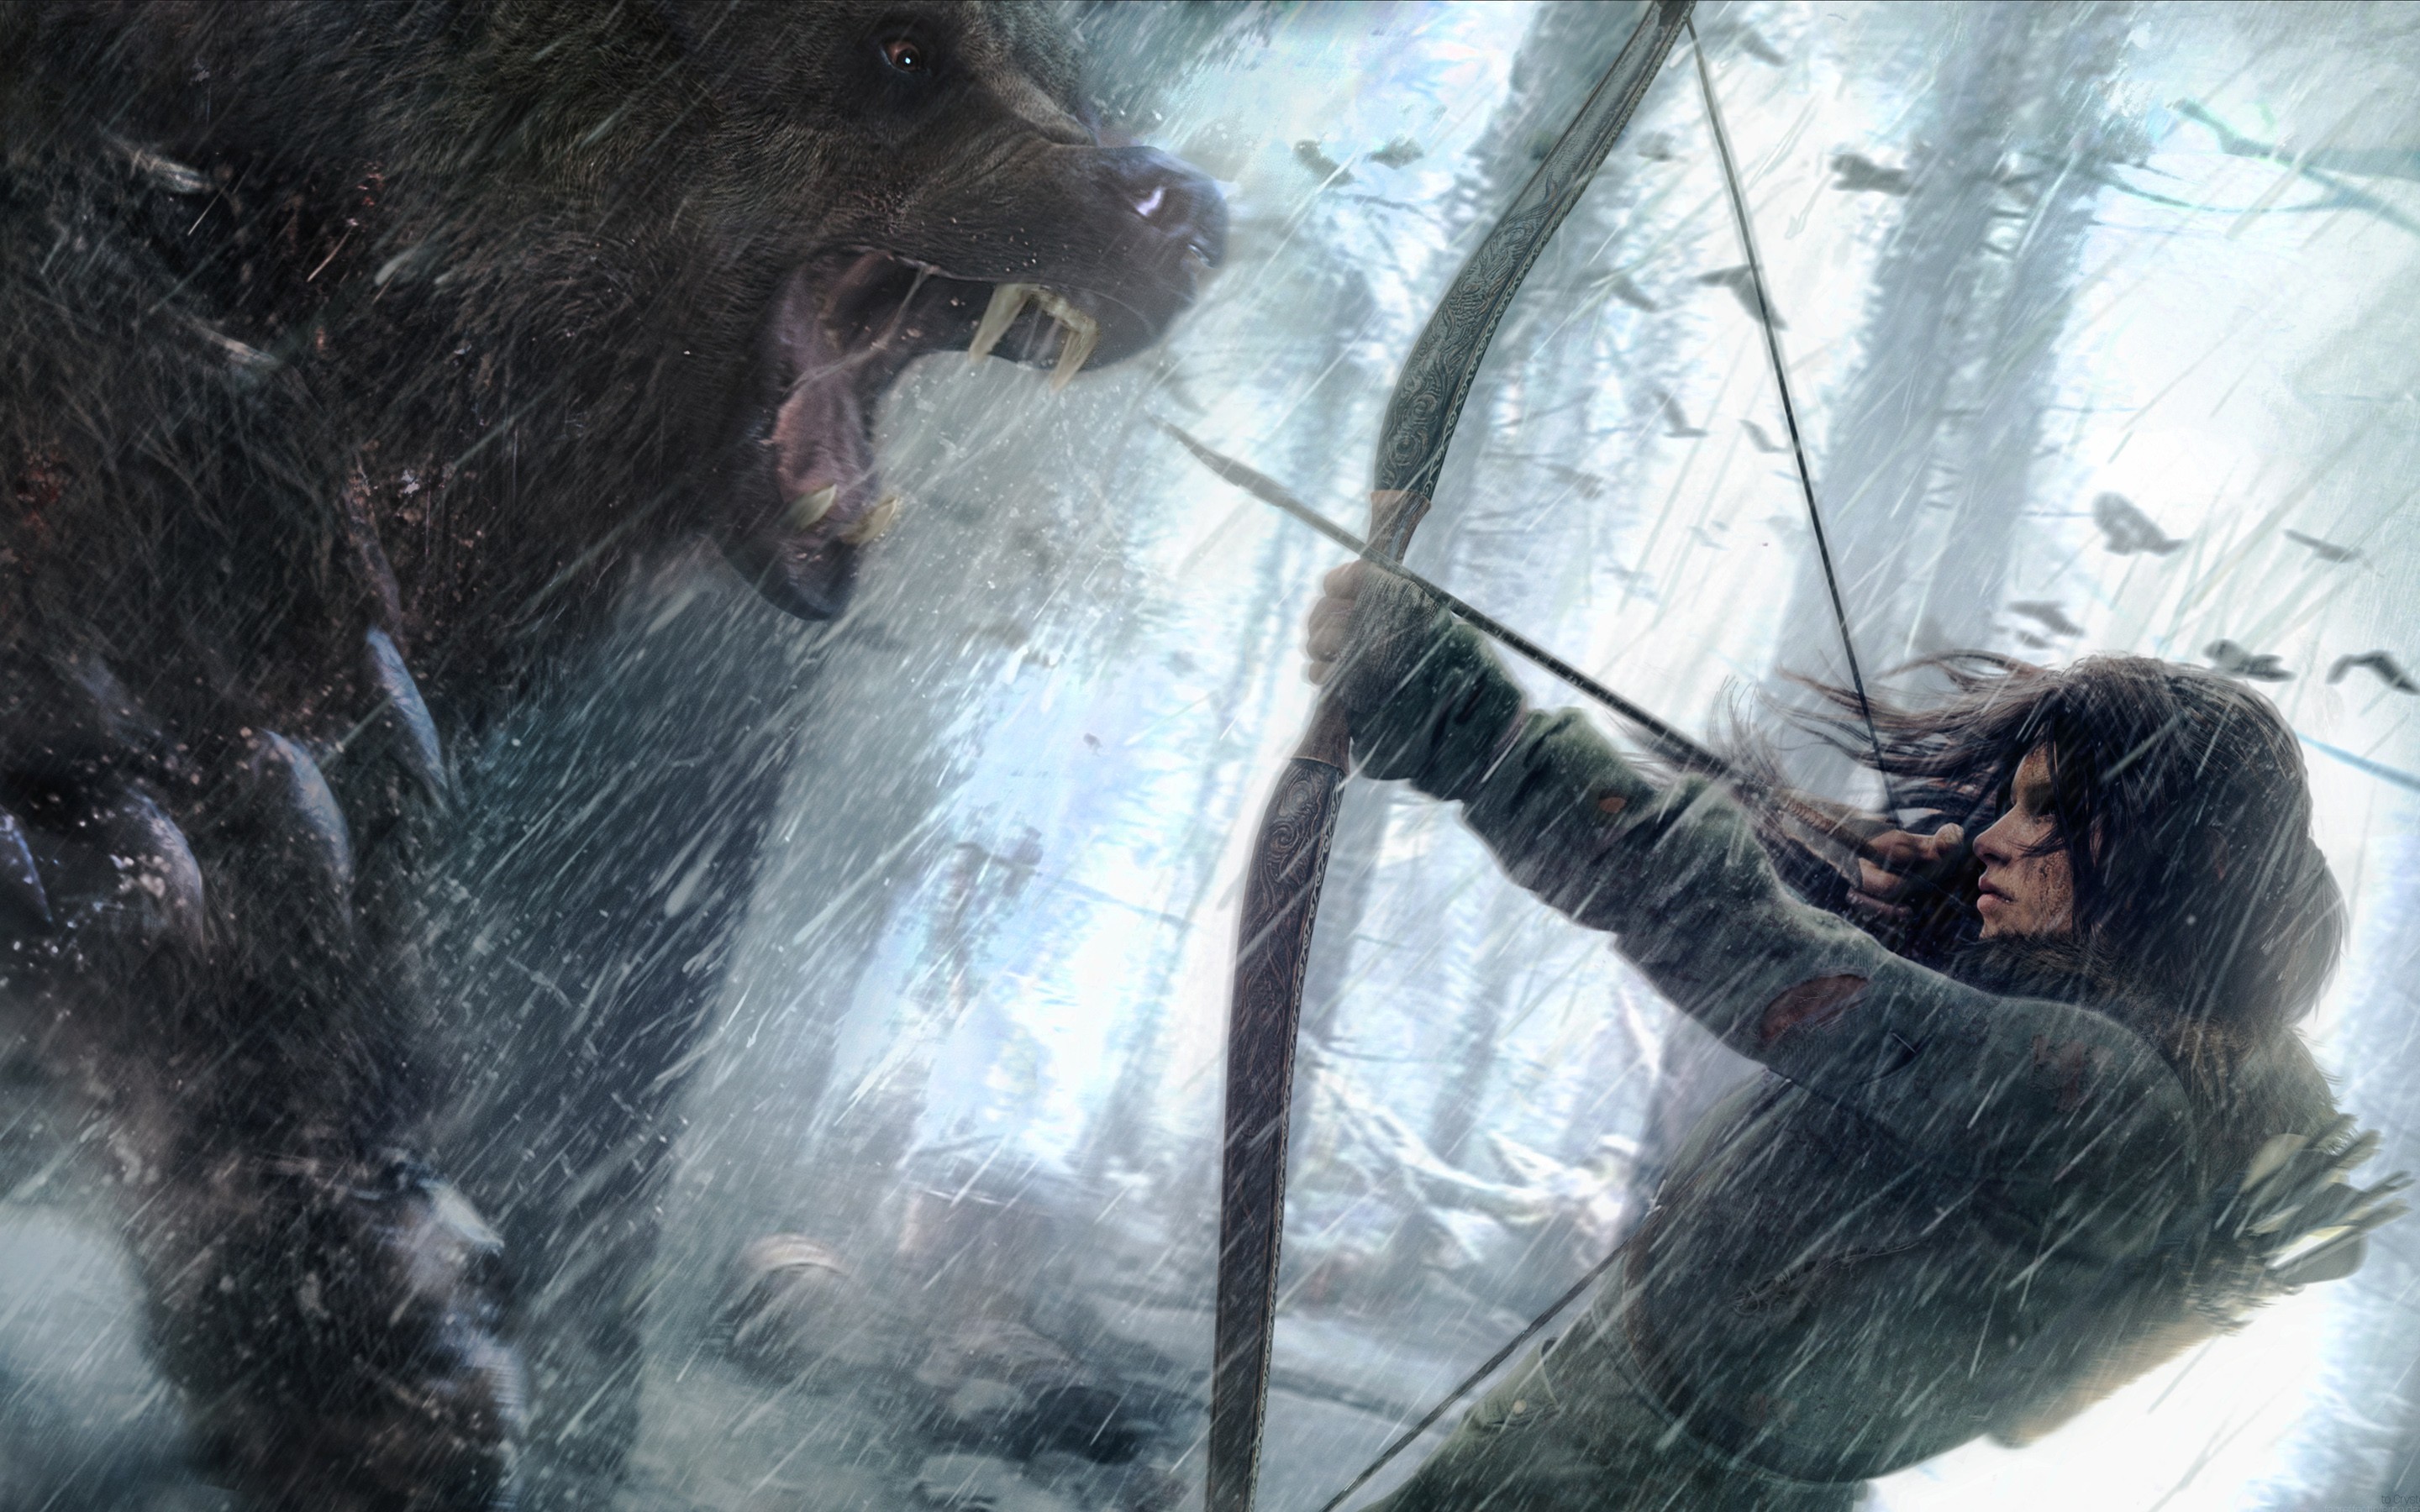 General 2880x1800 Rise of the Tomb Raider artwork video games Tomb Raider video game girls bow bears creature Lara Croft (Tomb Raider) bow and arrow